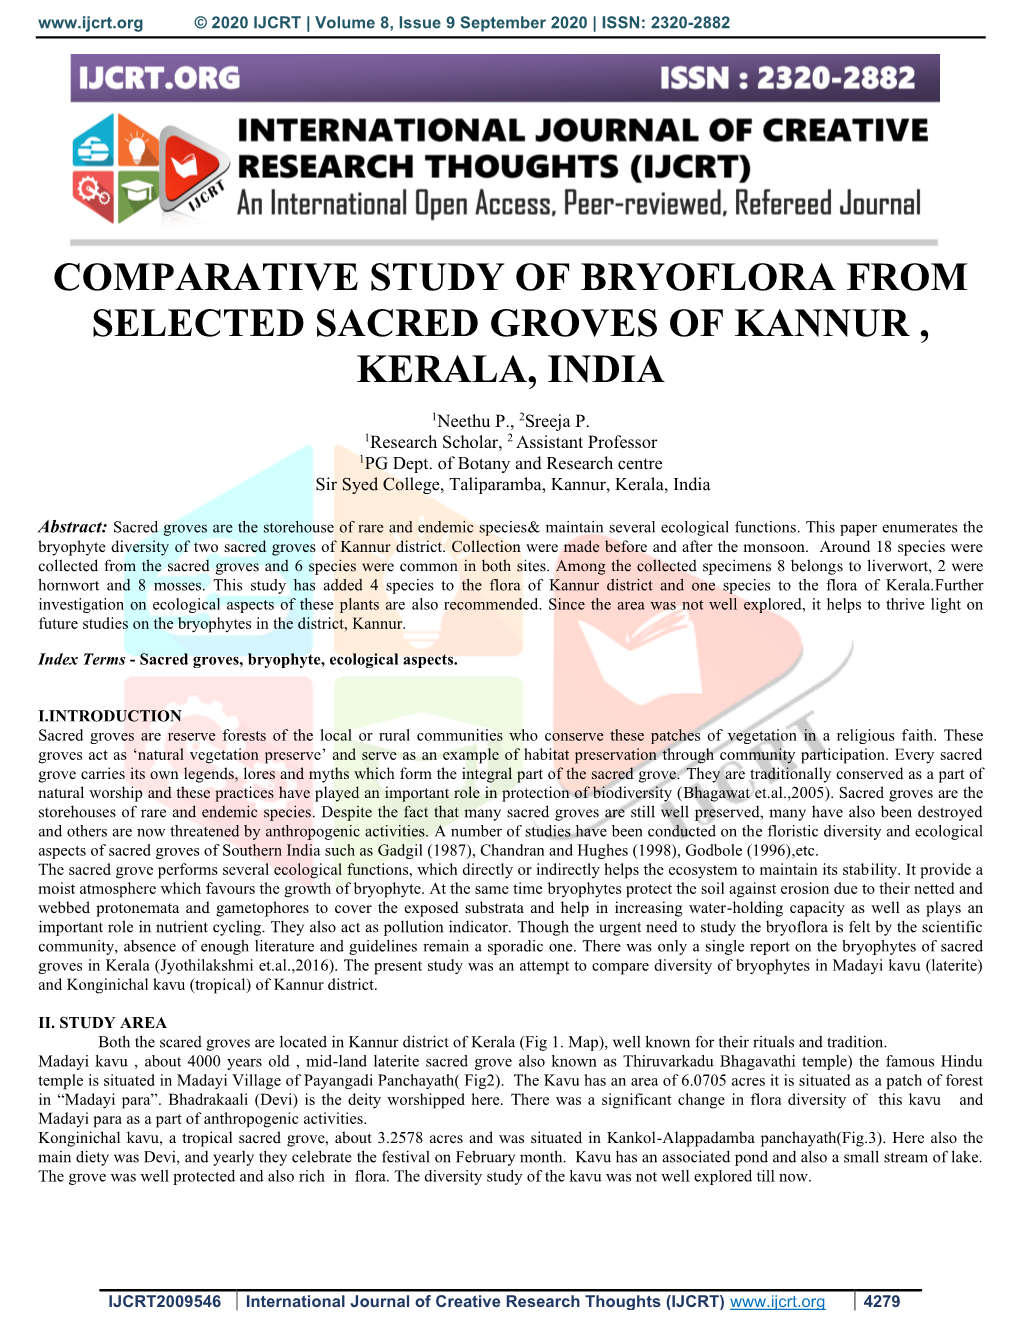 Comparative Study of Bryoflora from Selected Sacred Groves of Kannur , Kerala, India